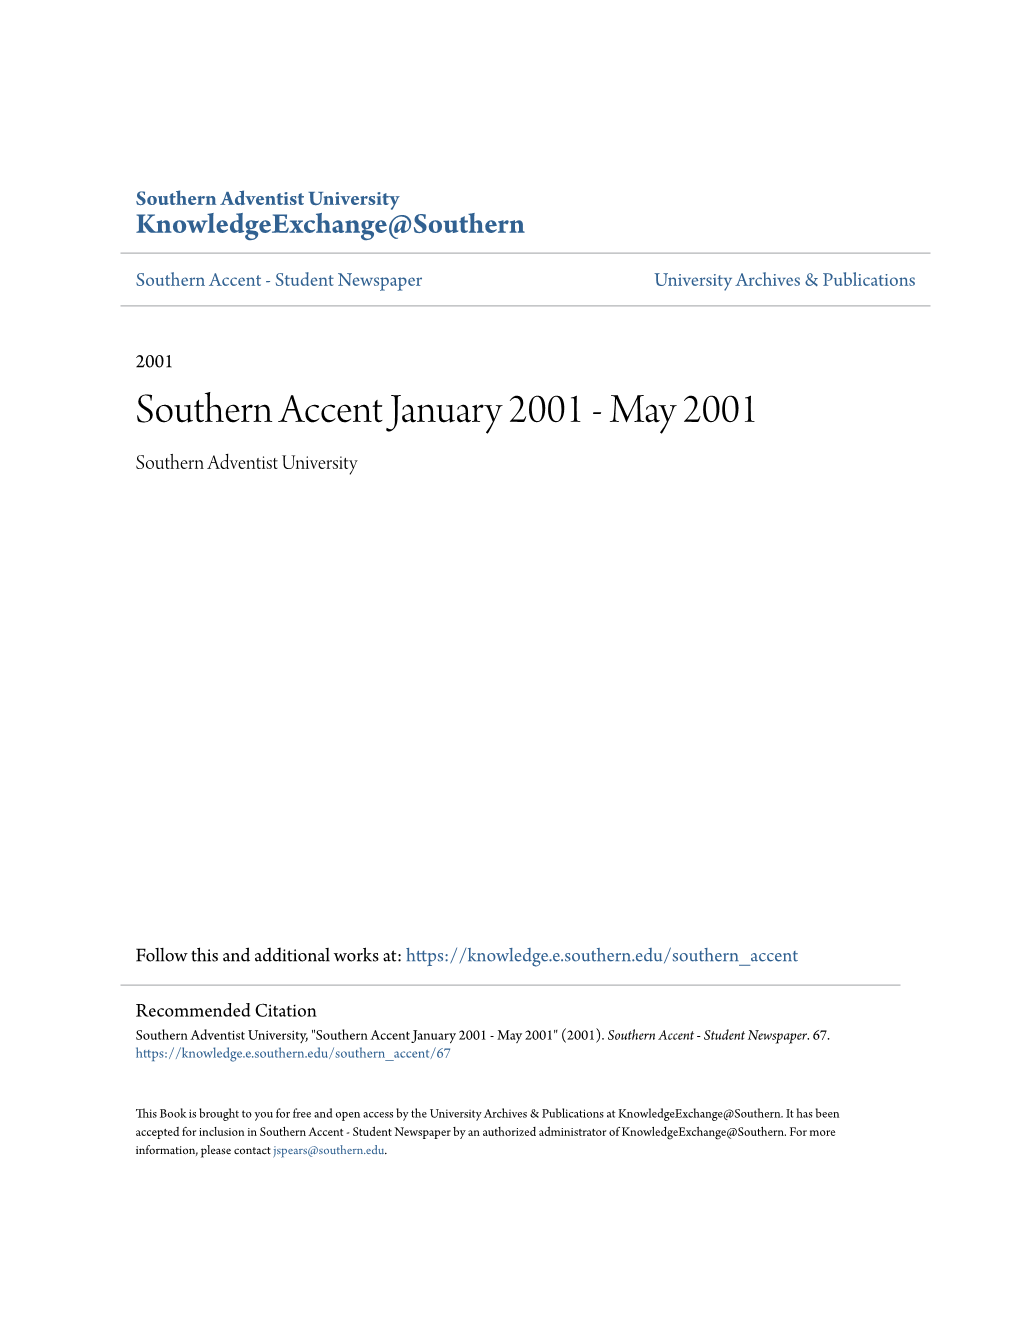 Southern Accent January 2001 - May 2001 Southern Adventist University